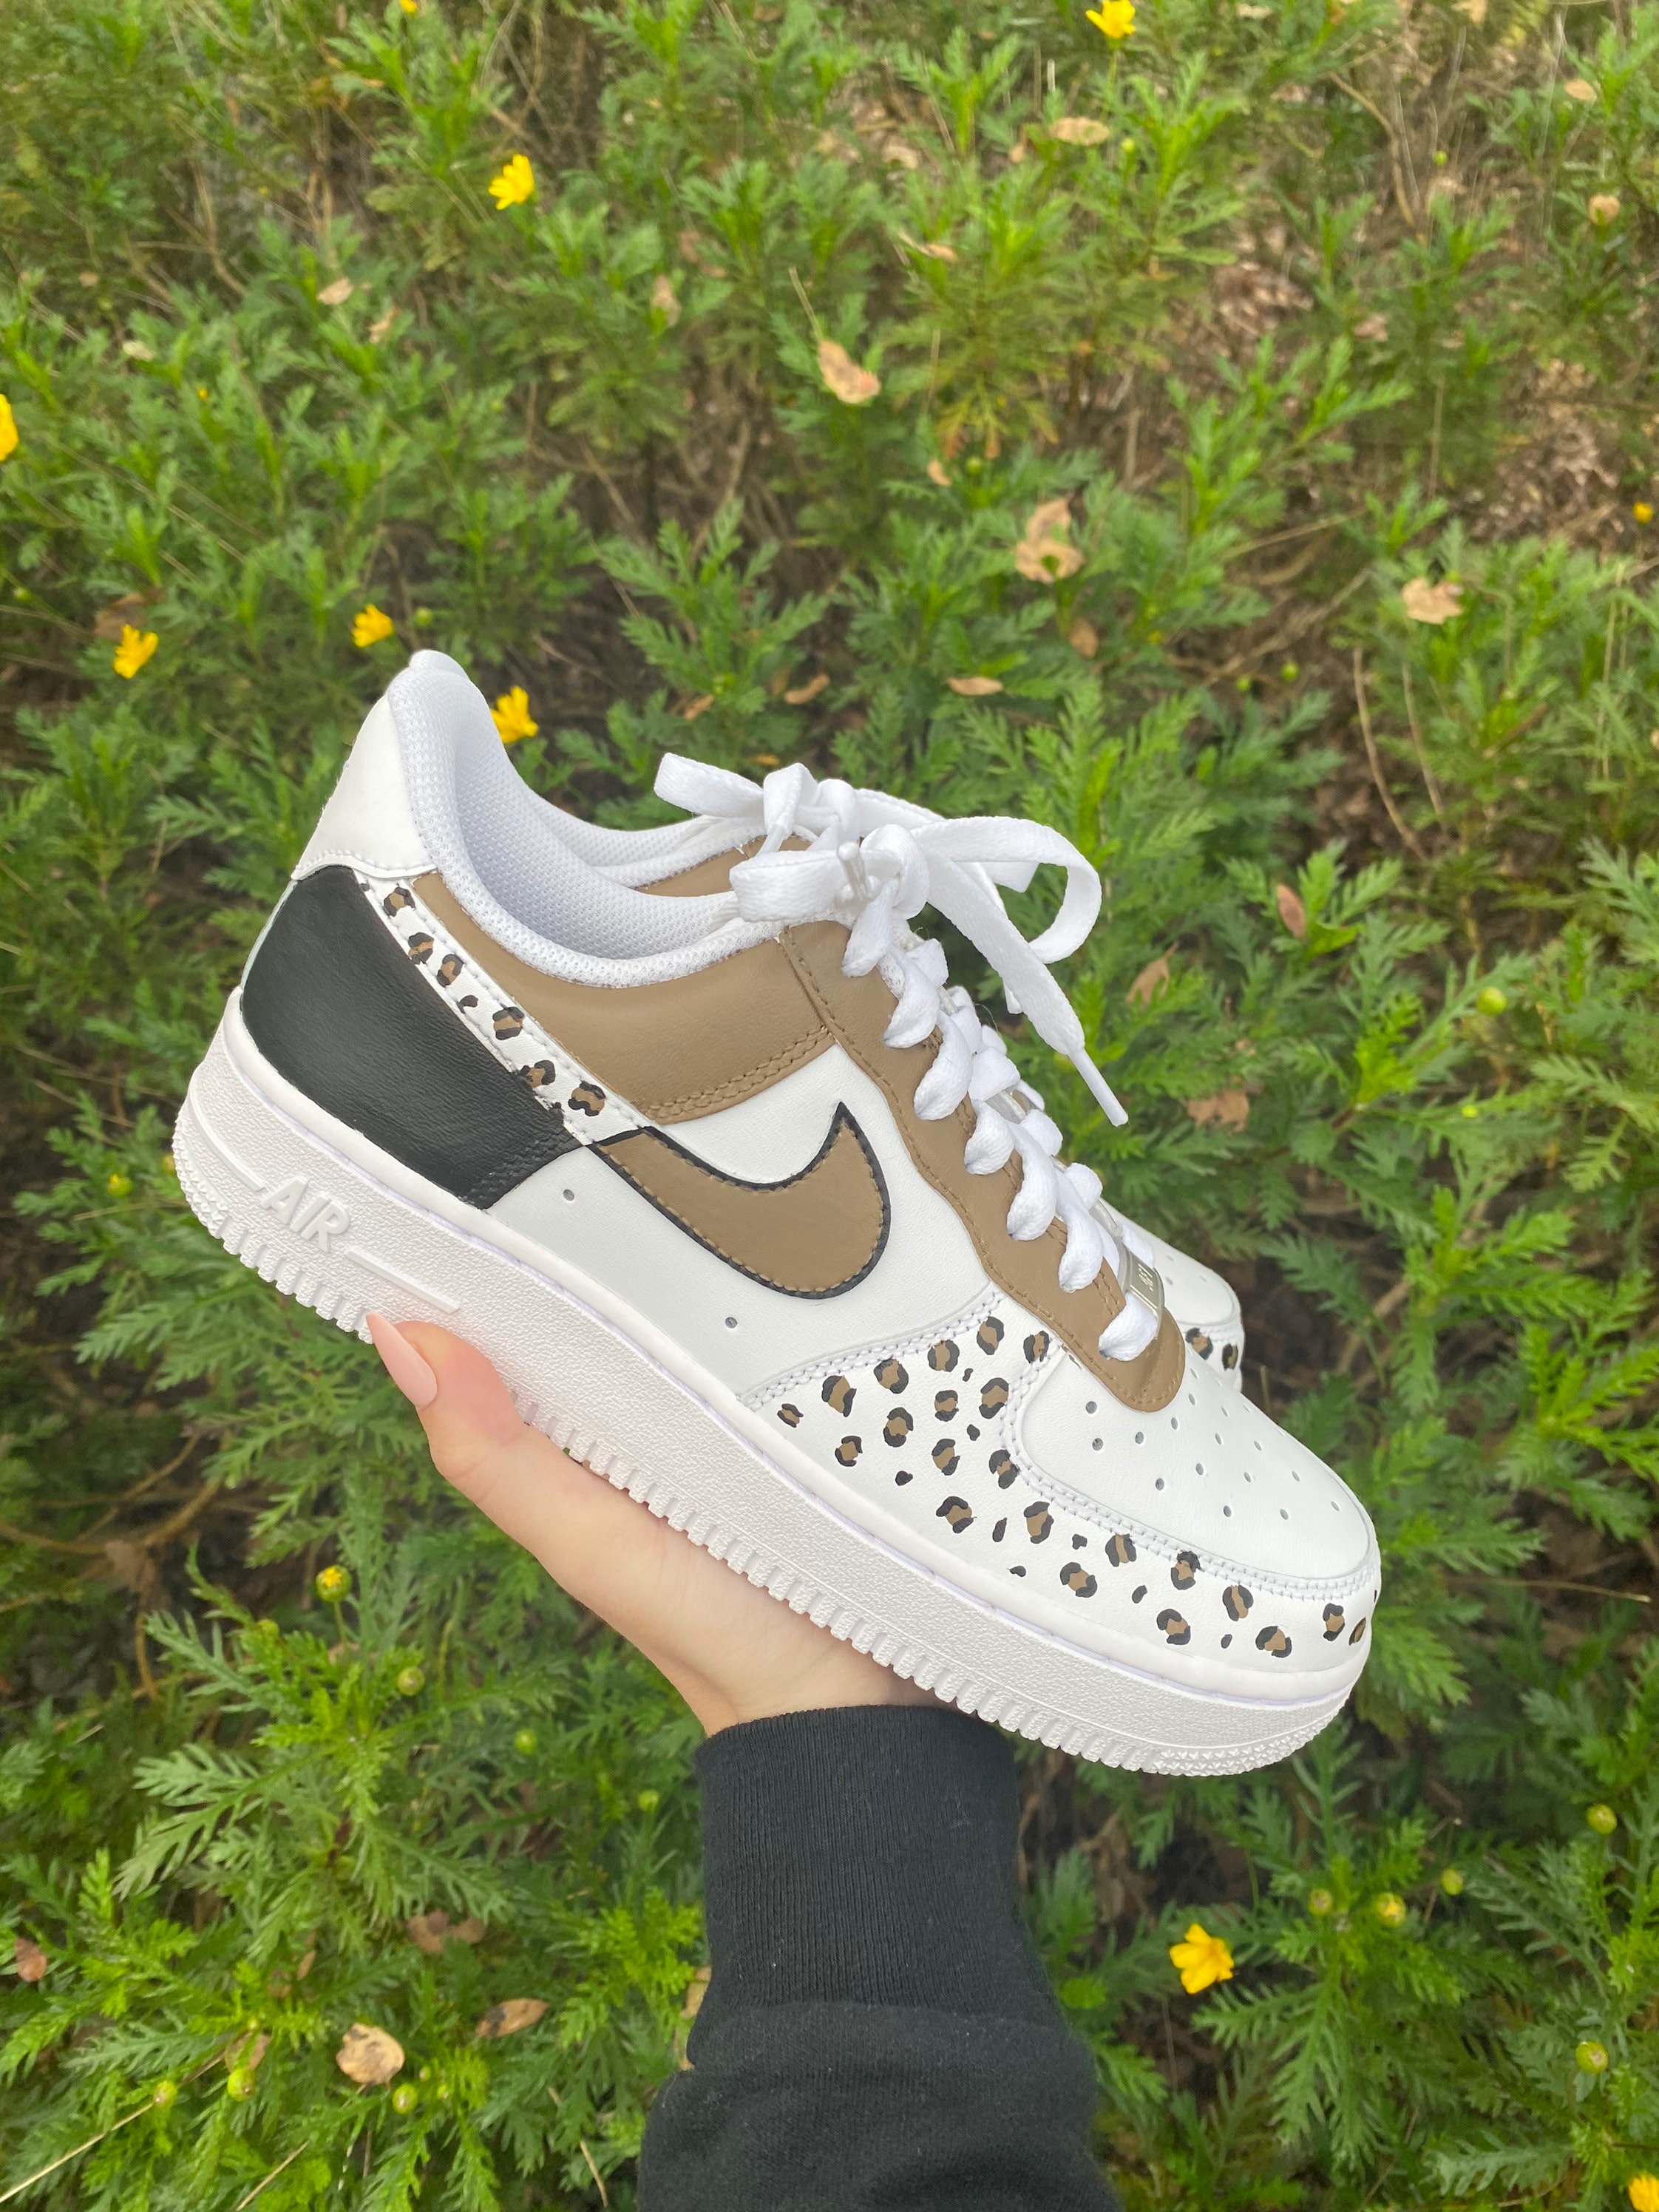 Nike Air Force 1 Custom Sneakers Low Two Tone Army Military Green White  Shoes